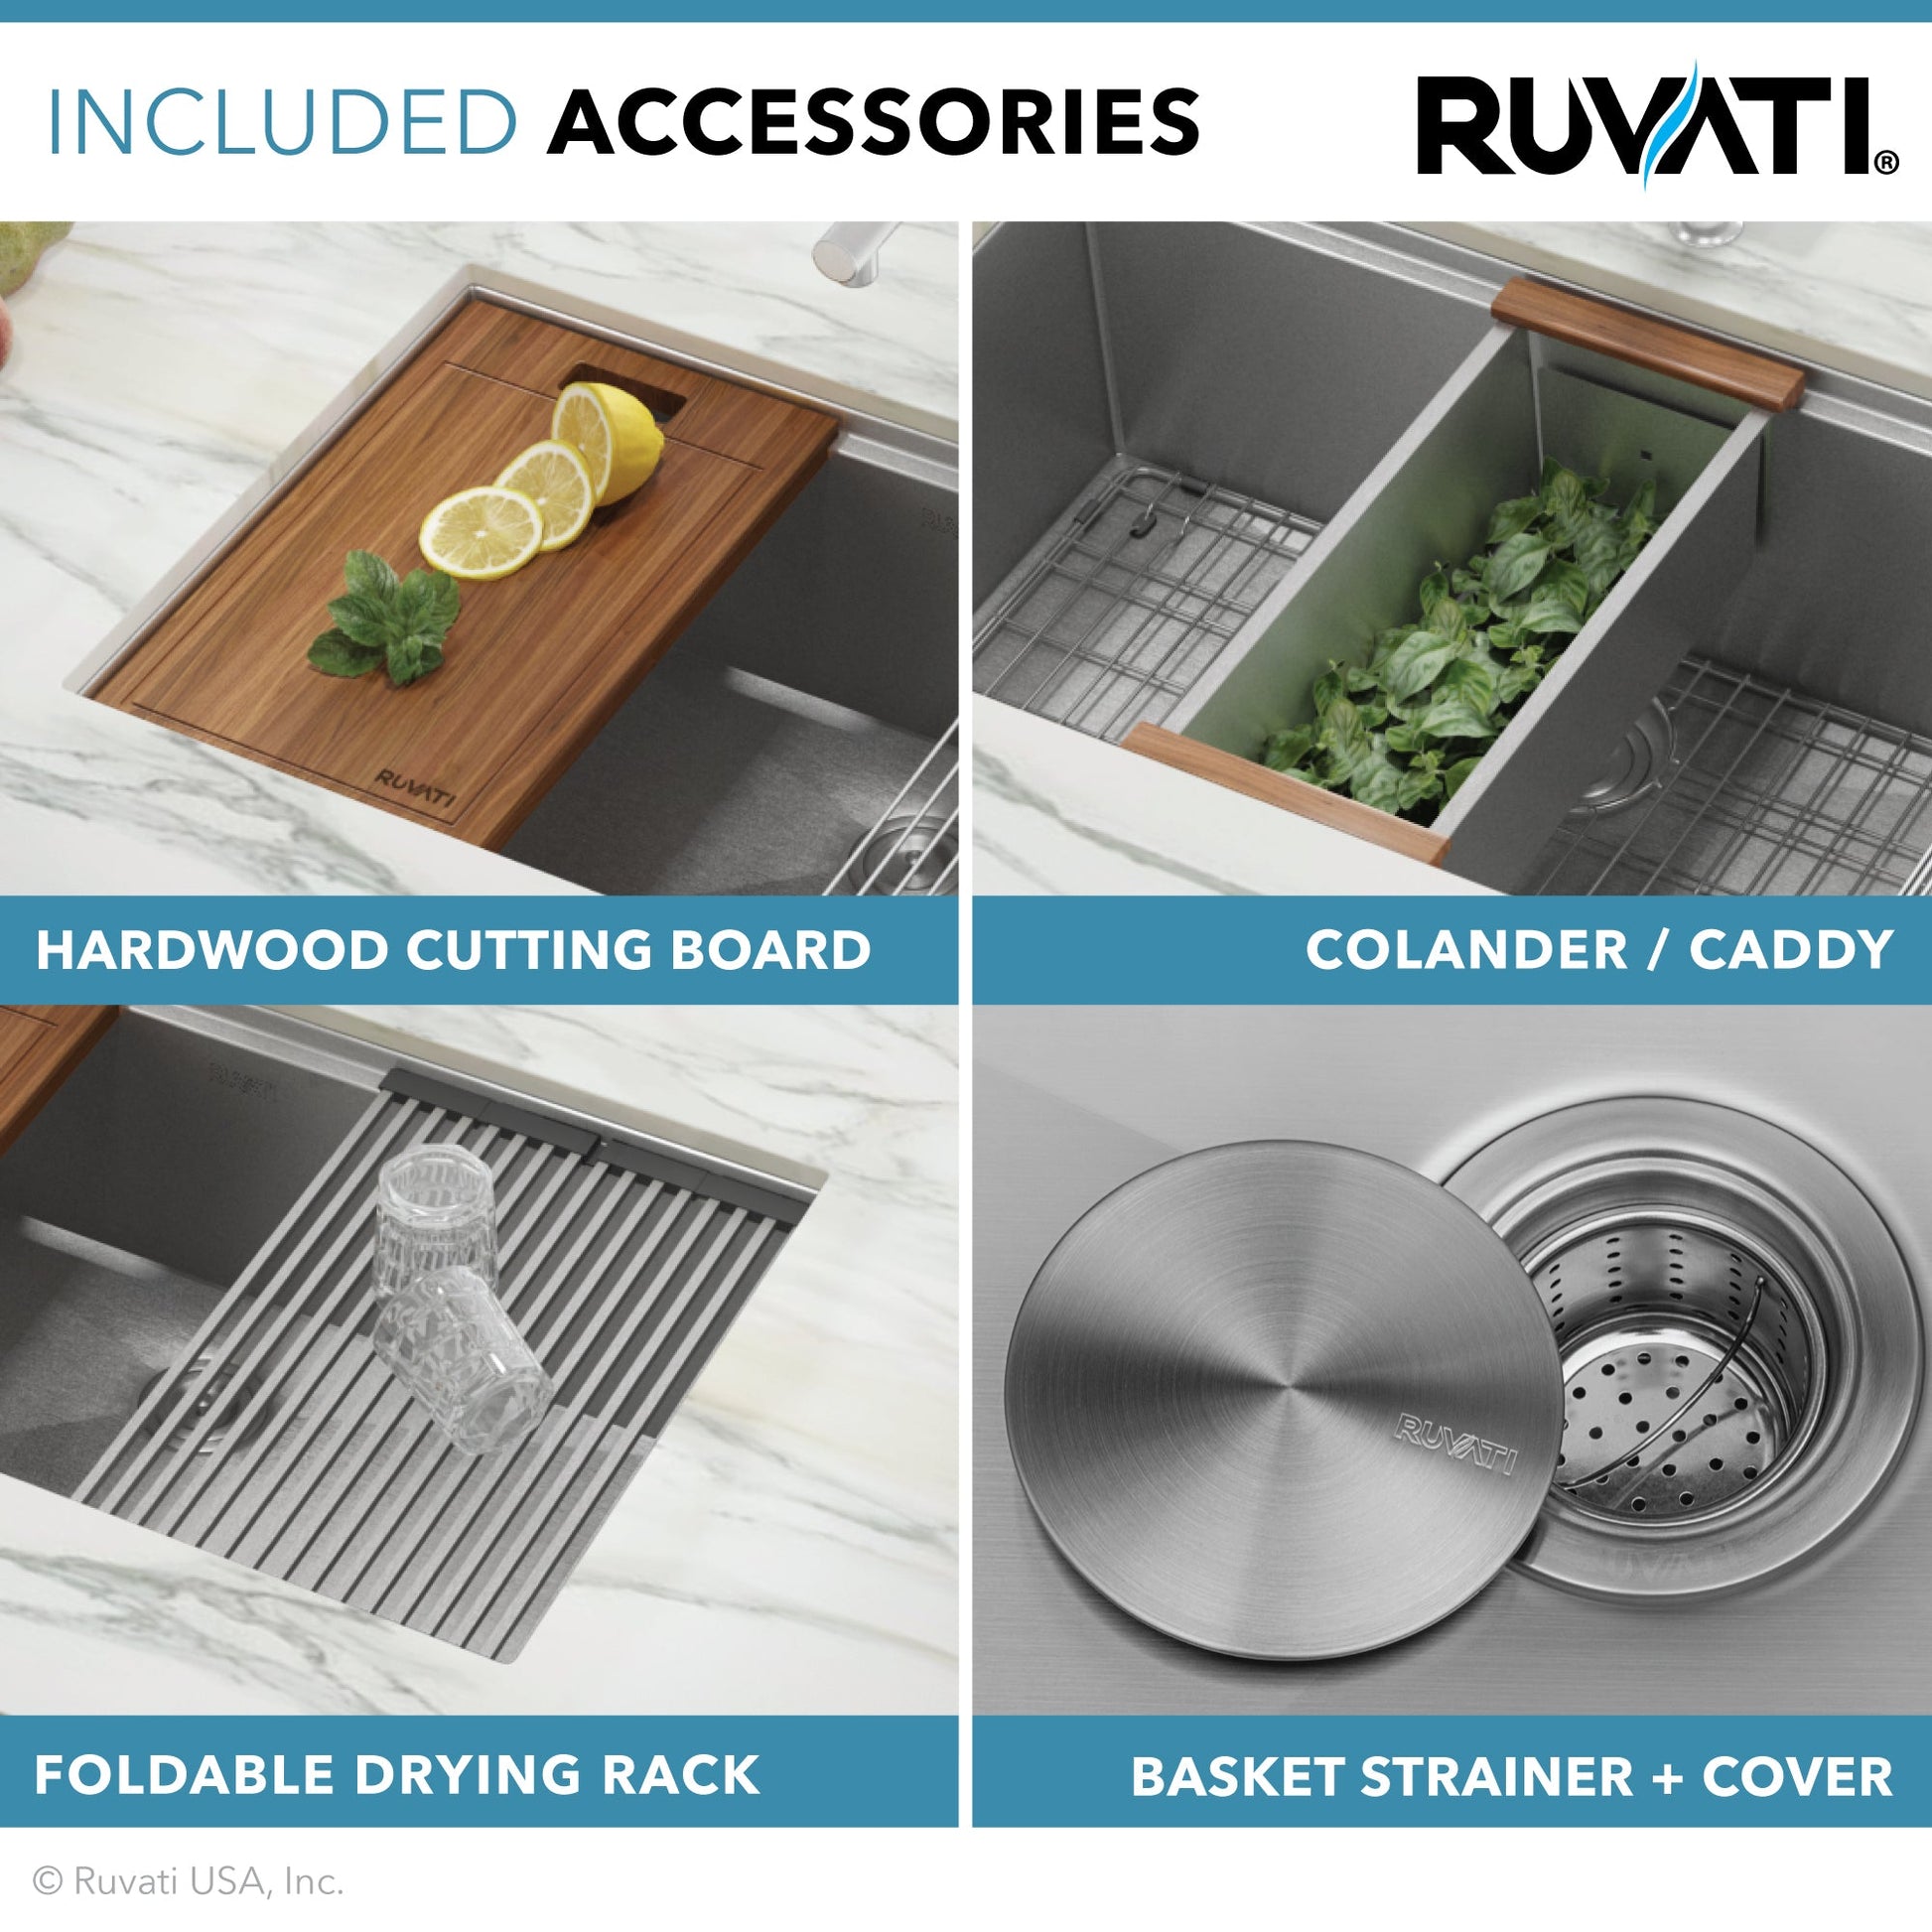 Ruvati Roma 30" x 19" Undermount Stainless Steel Double Bowl 50/50 Workstation Sink With Bottom Rinse Grid and Drain Assembly